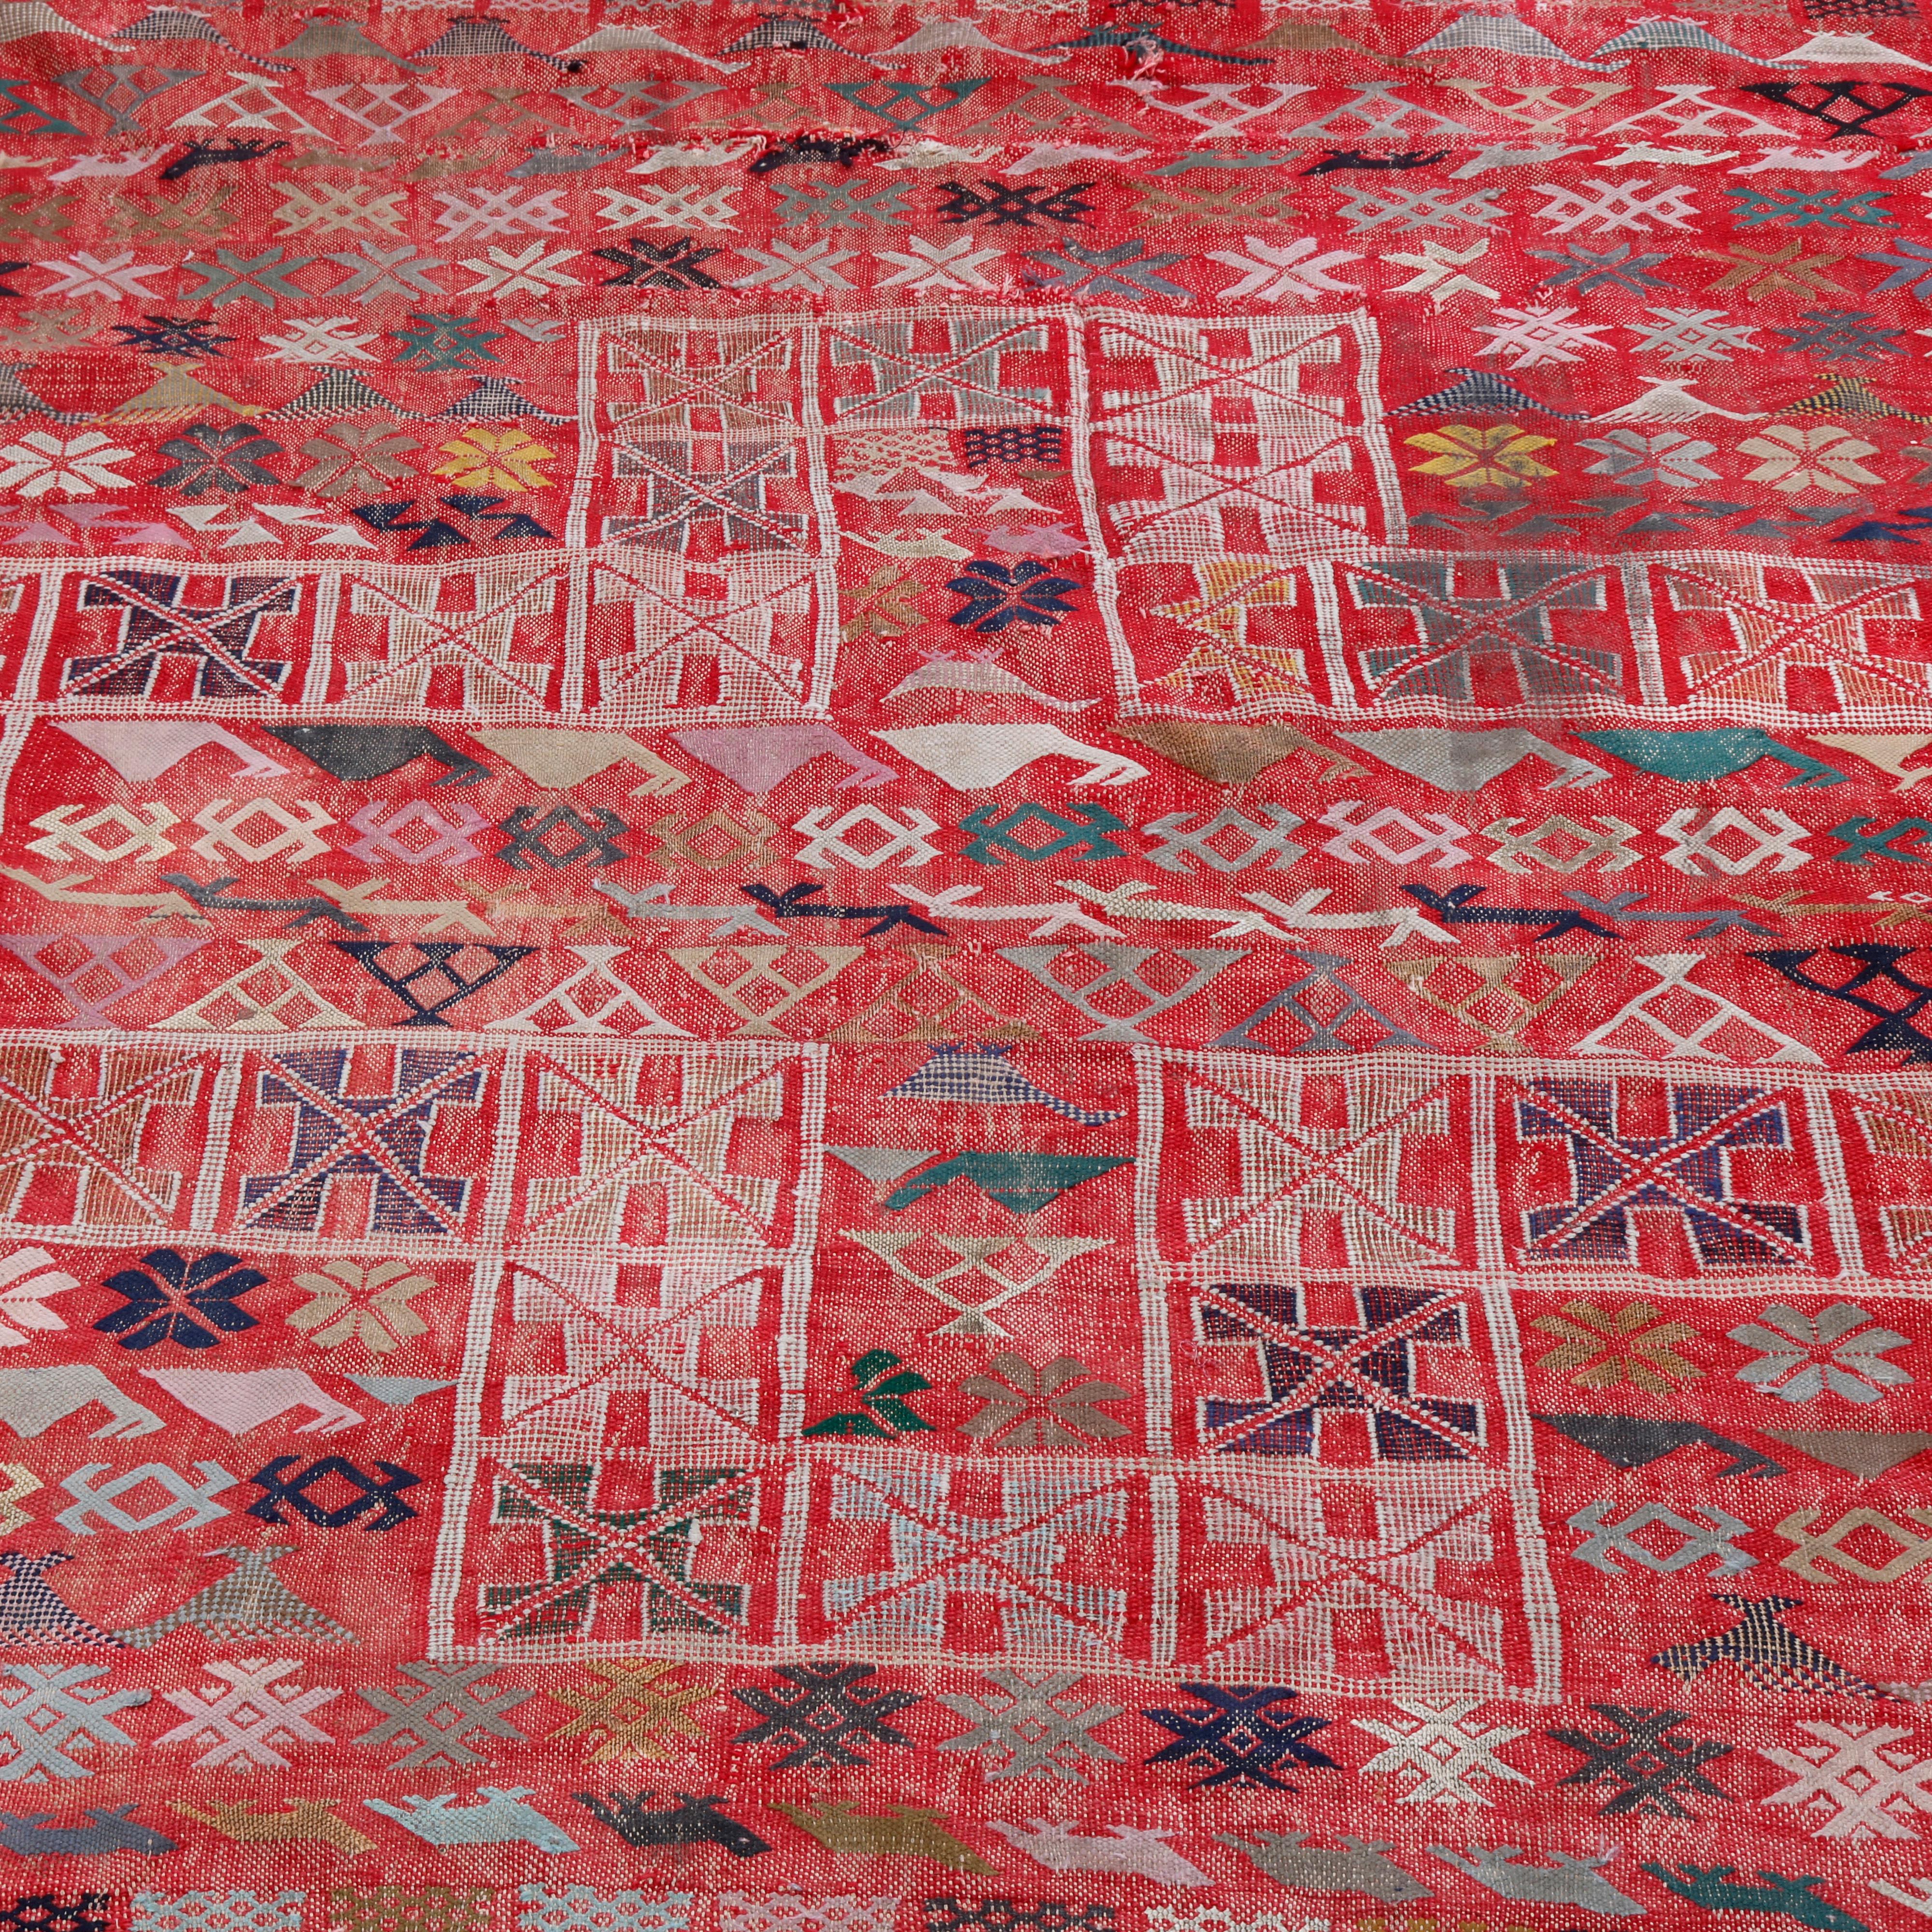 An antique Moroccan Soumak area rug offers wool construction with central geometric medallion and stylized flowers and animals (birds) on red ground, circa 1920.

Measures: 110